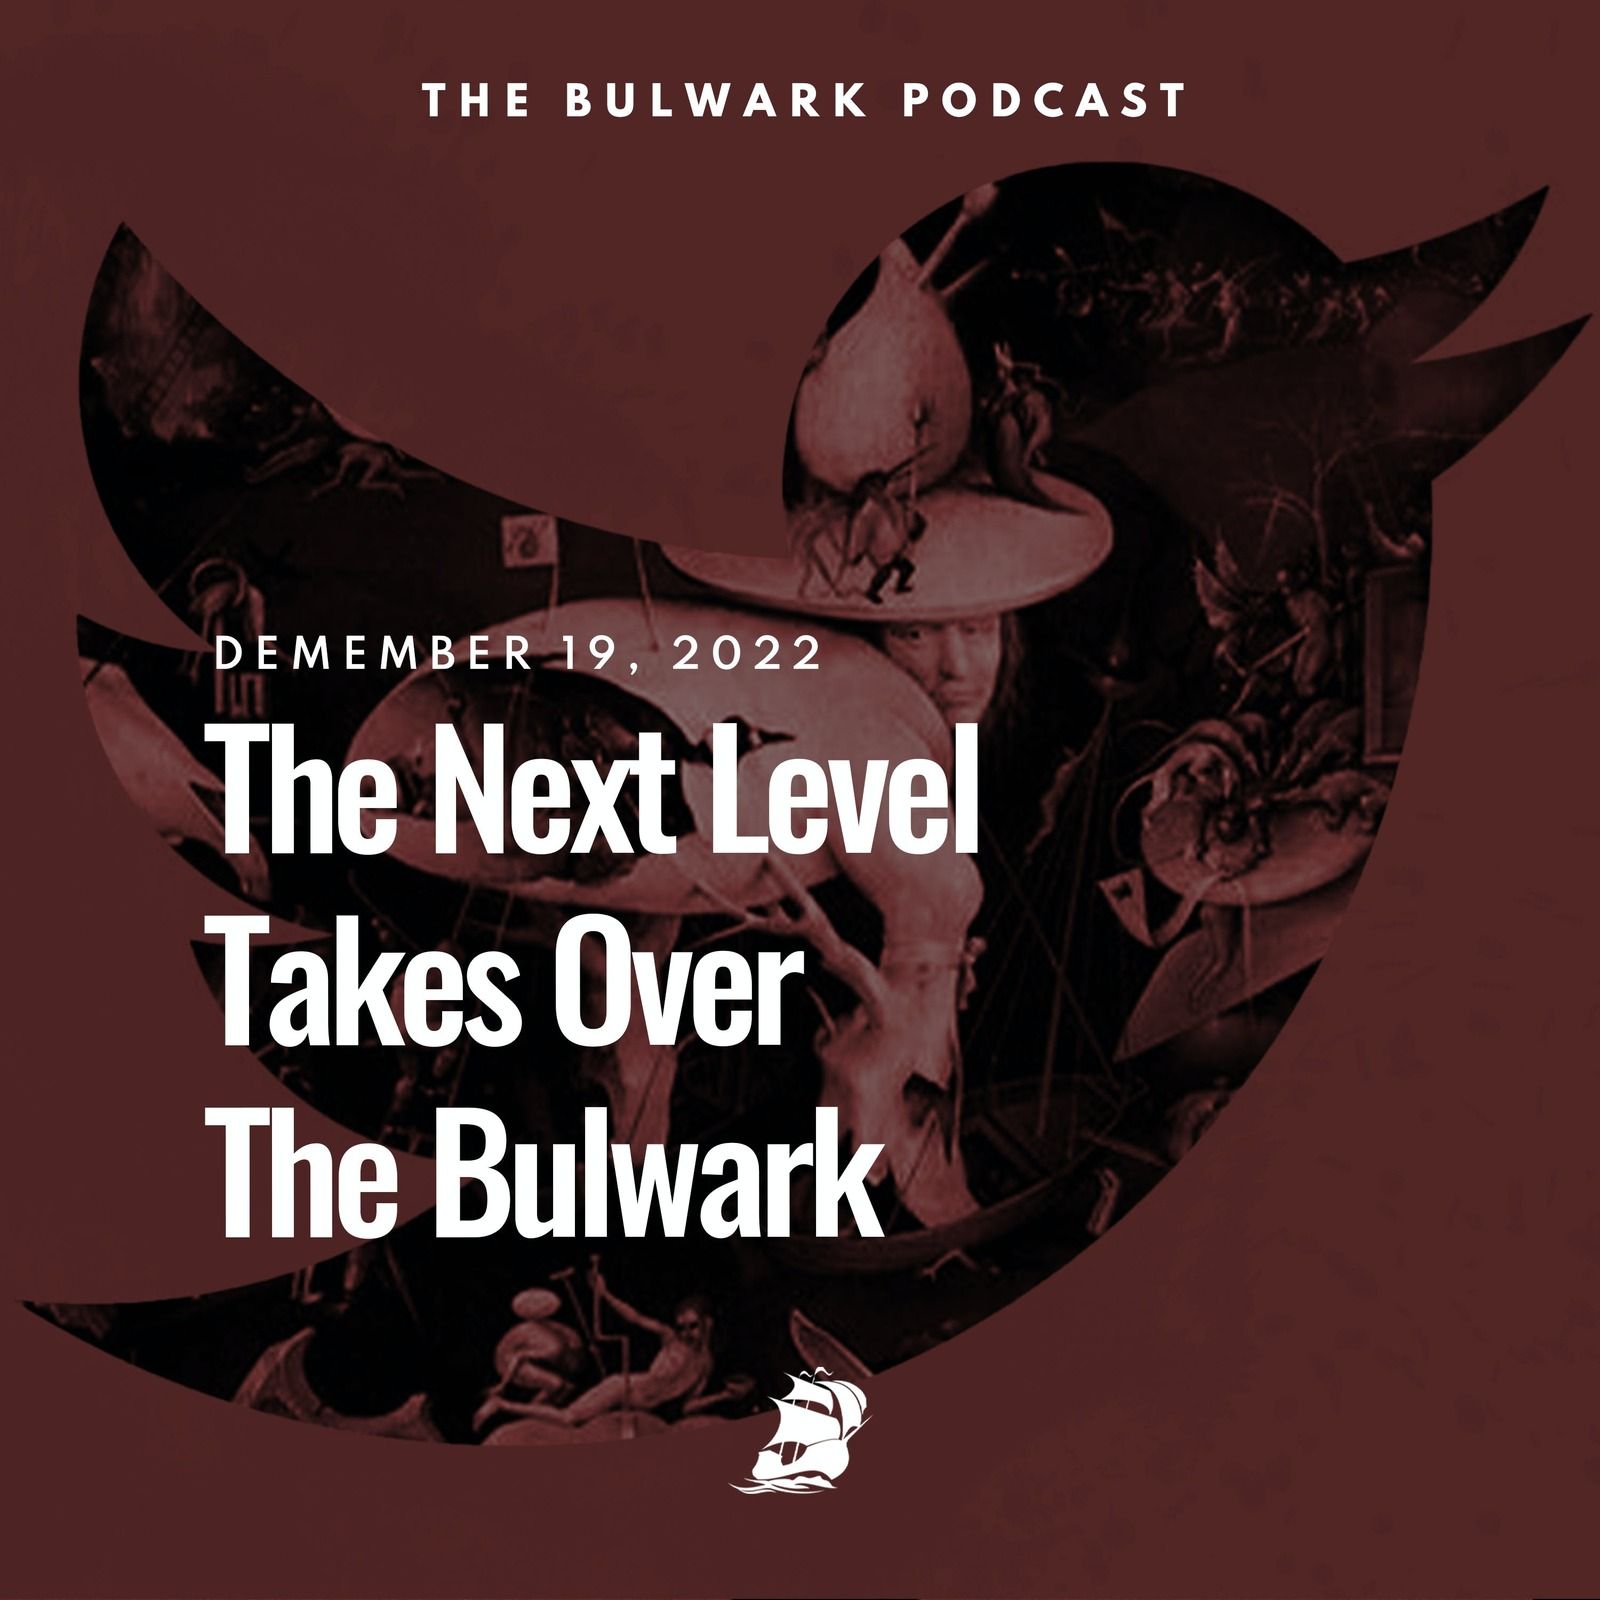 The Next Level Takes Over The Bulwark